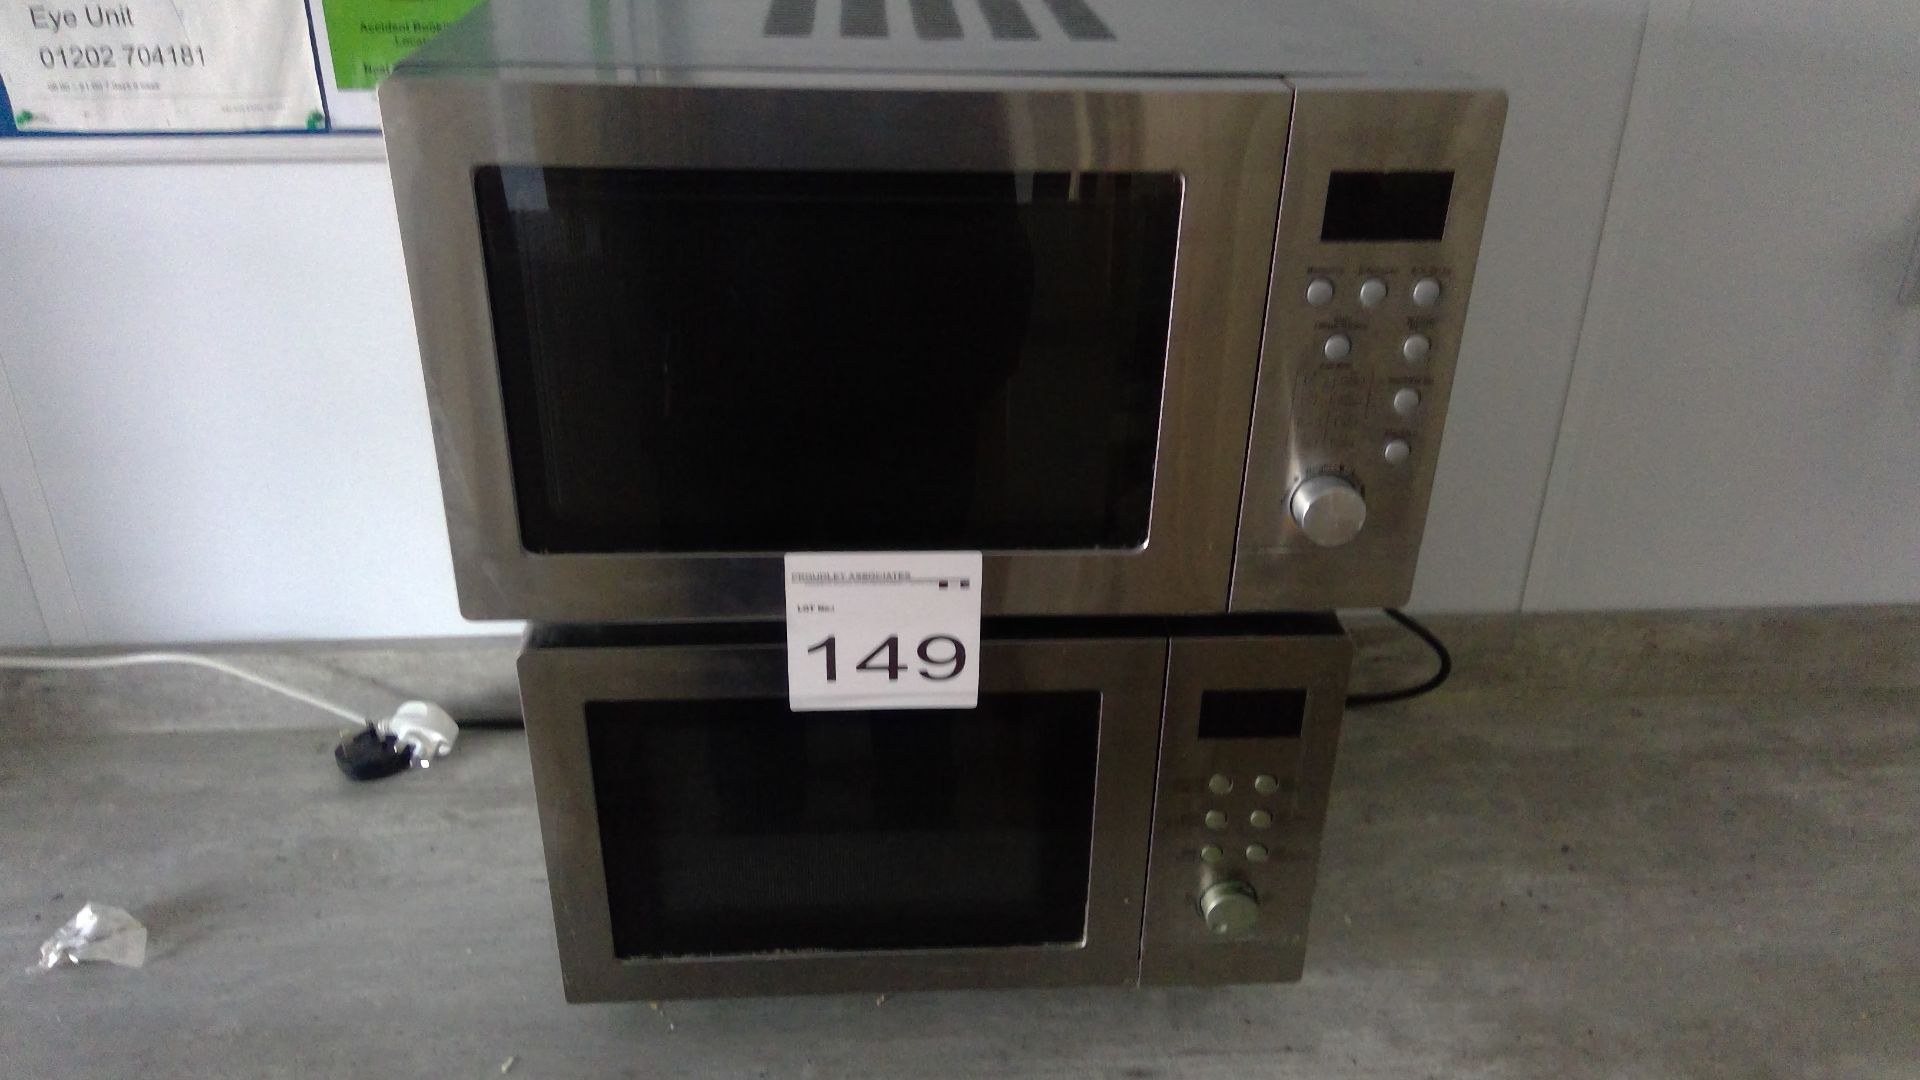 2 No Freestanding stainless steel microwaves